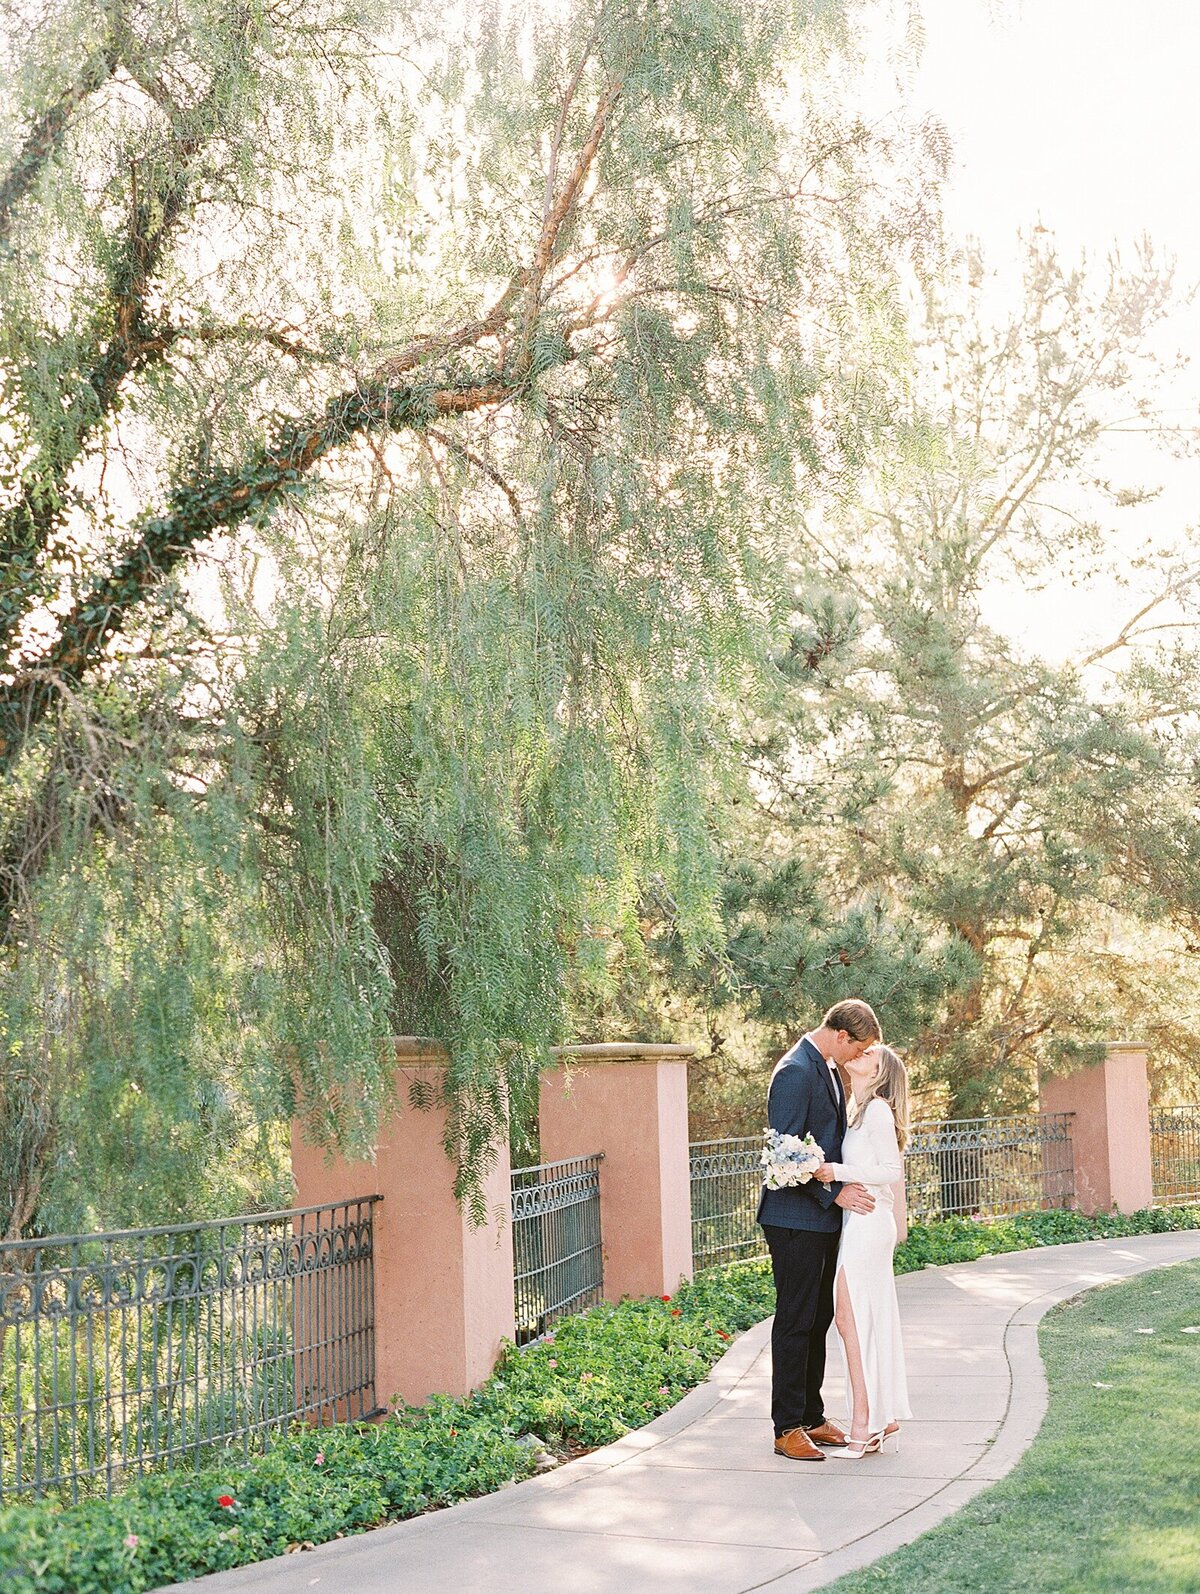 Fairmont Grand Del Mar engagement session by Lisa Riley.